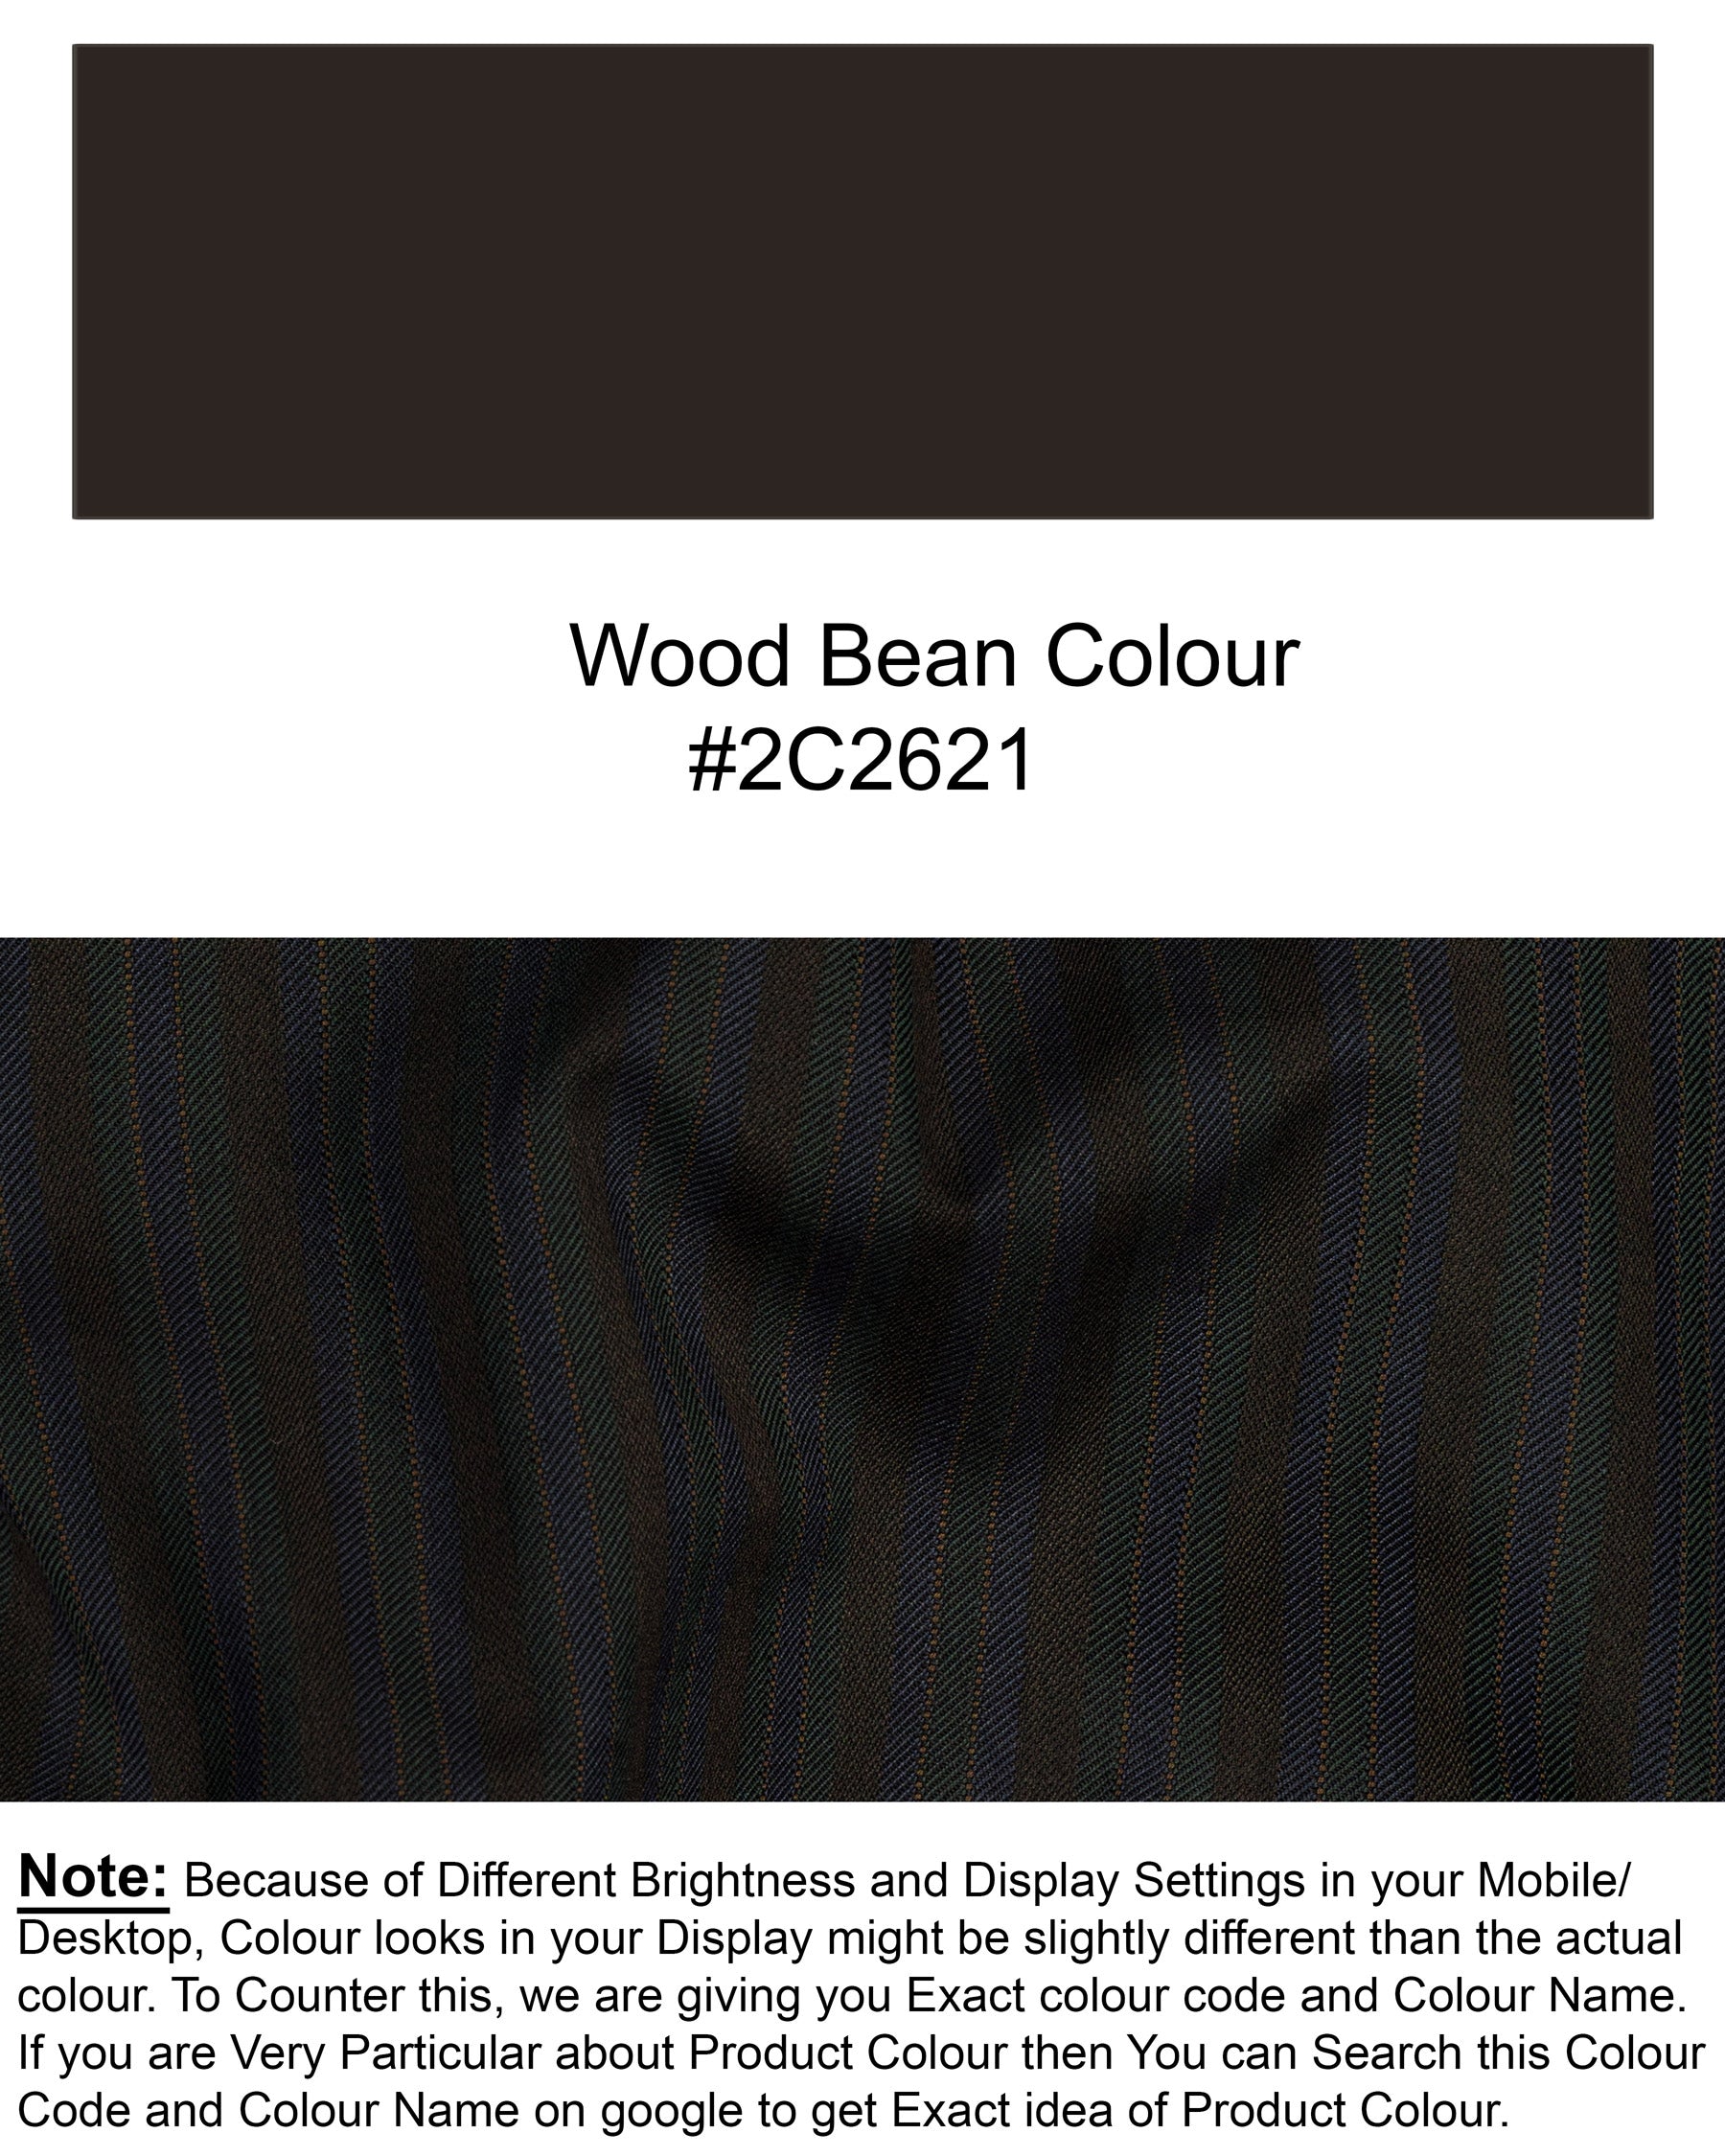 Wood Bean Striped Wool Rich Double Breasted Suit ST1535-DB-36, ST1535-DB-38, ST1535-DB-40, ST1535-DB-42, ST1535-DB-44, ST1535-DB-46, ST1535-DB-48, ST1535-DB-50, ST1535-DB-52, ST1535-DB-54, ST1535-DB-56, ST1535-DB-58, ST1535-DB-60